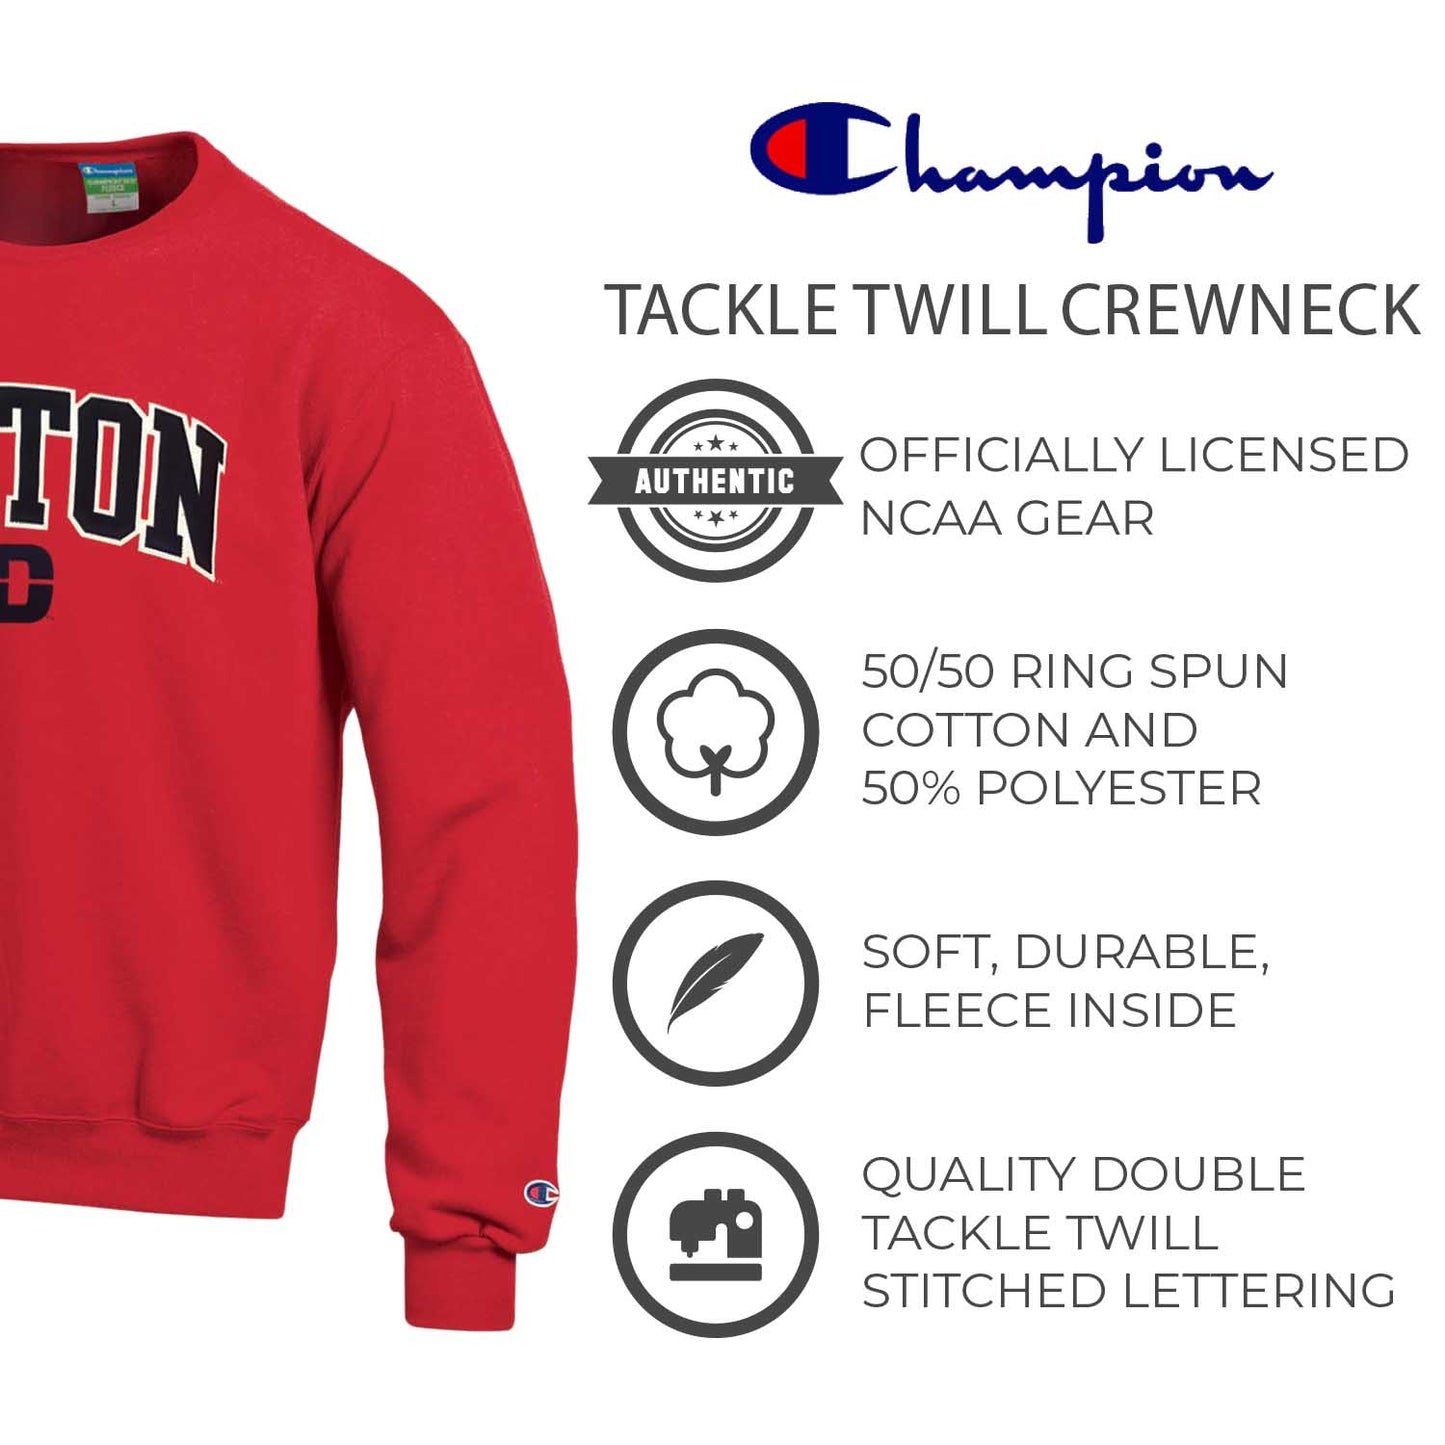 Dayton Flyers Adult Tackle Twill Crewneck - Red